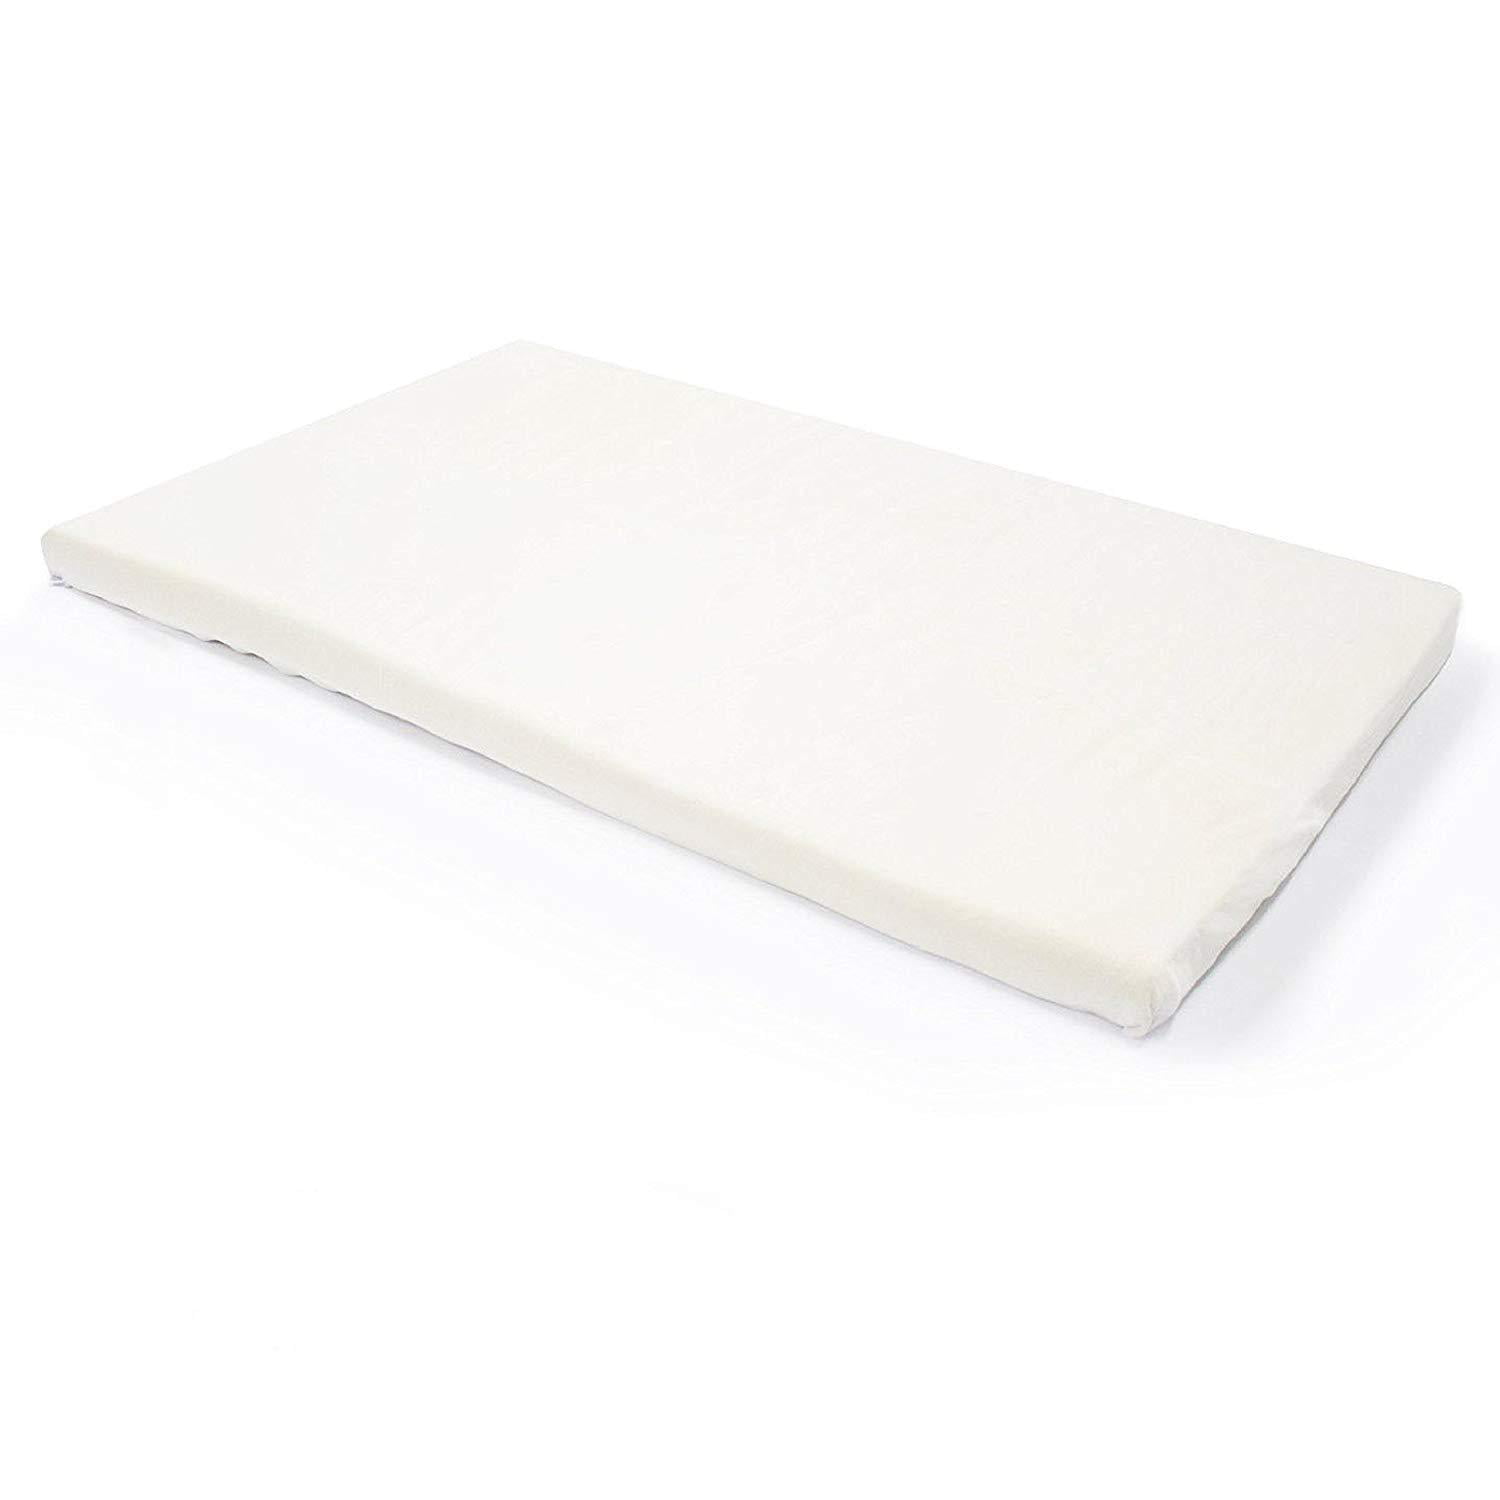 Milliard 2-Inch Ventilated Memory Foam Crib and Toddler ...